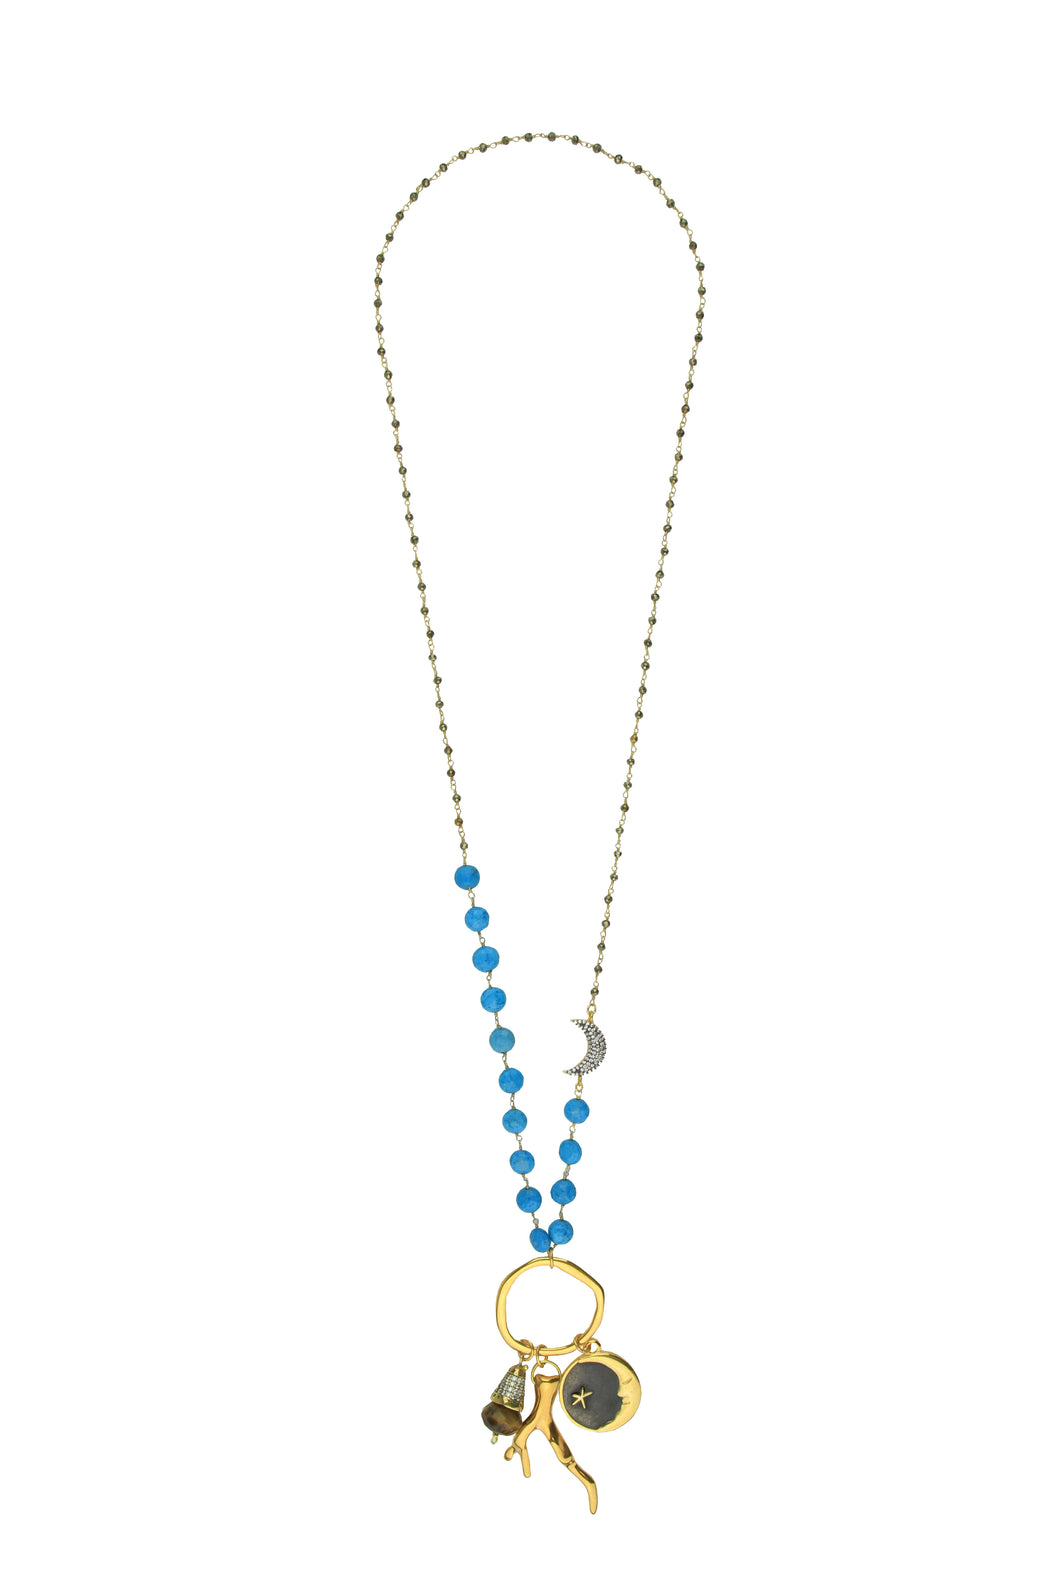 LONG CHARMS TURQUOISE NECKLACE